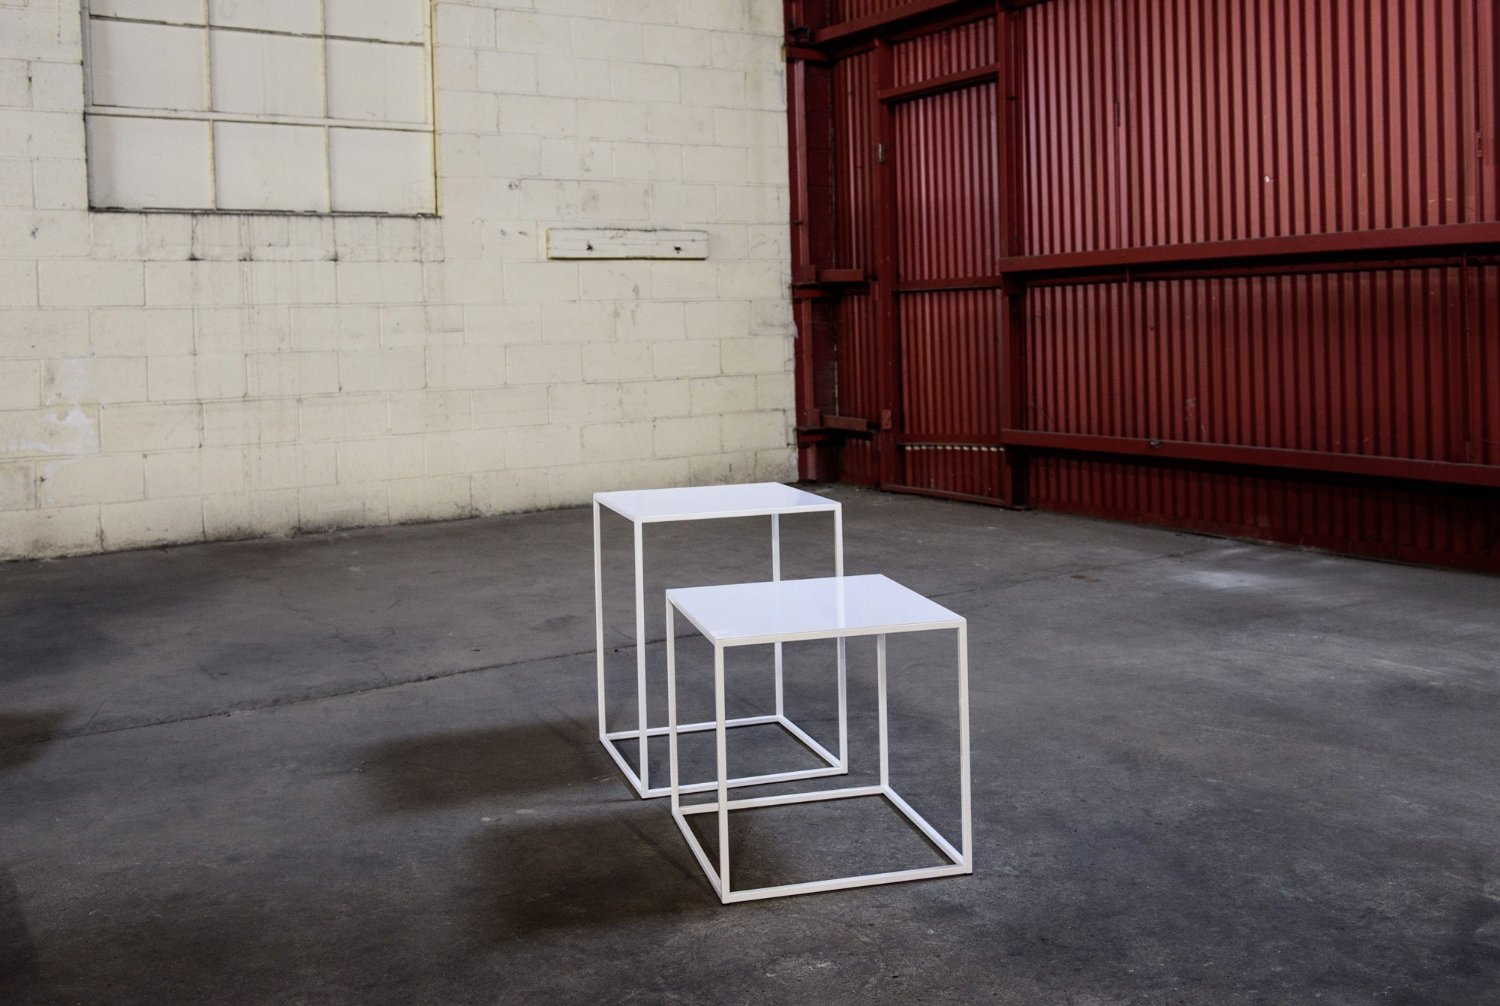 Two powder-coated white end tables, examples of futuristic furniture, by Patrick Cain Designs.